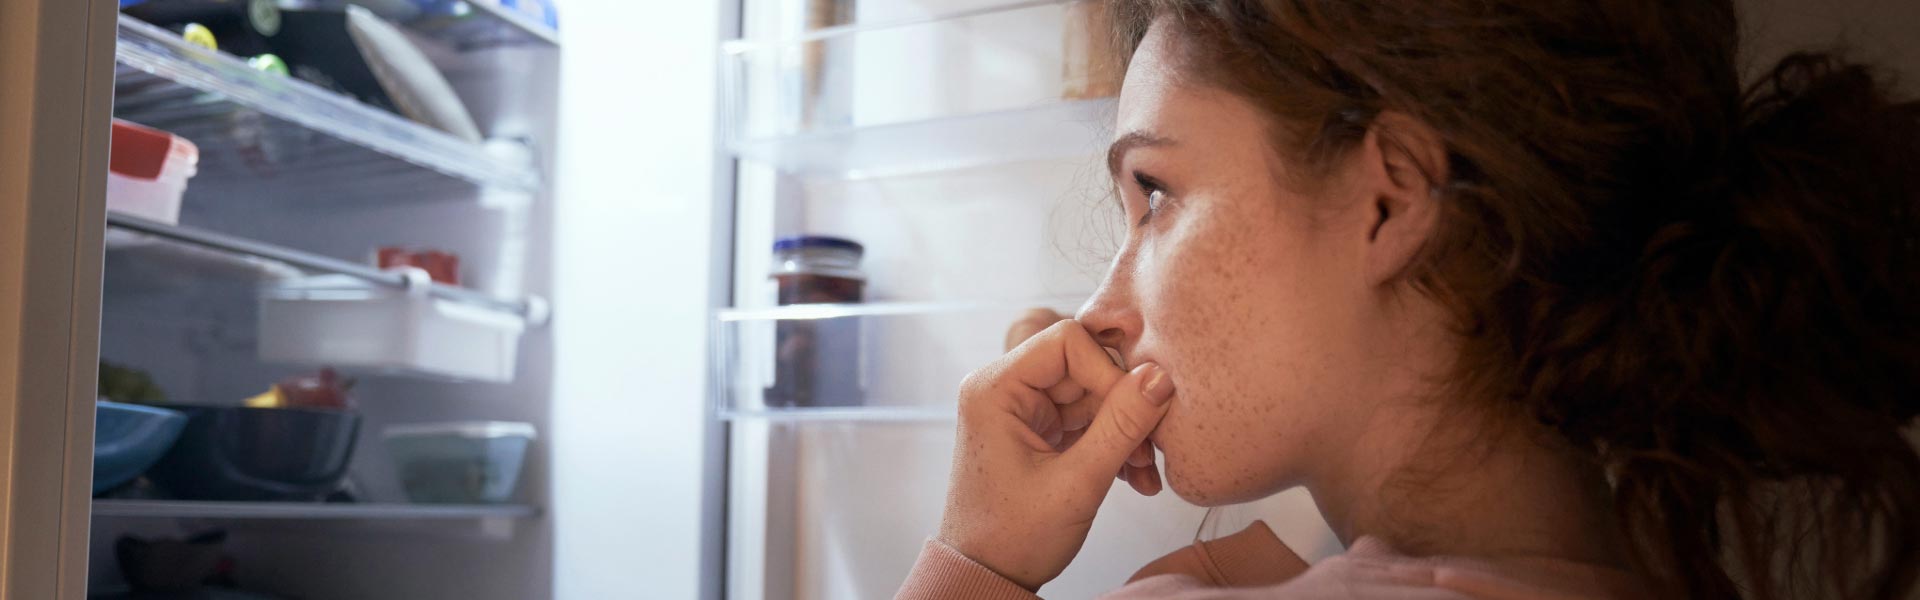 A woman looking into the fridge